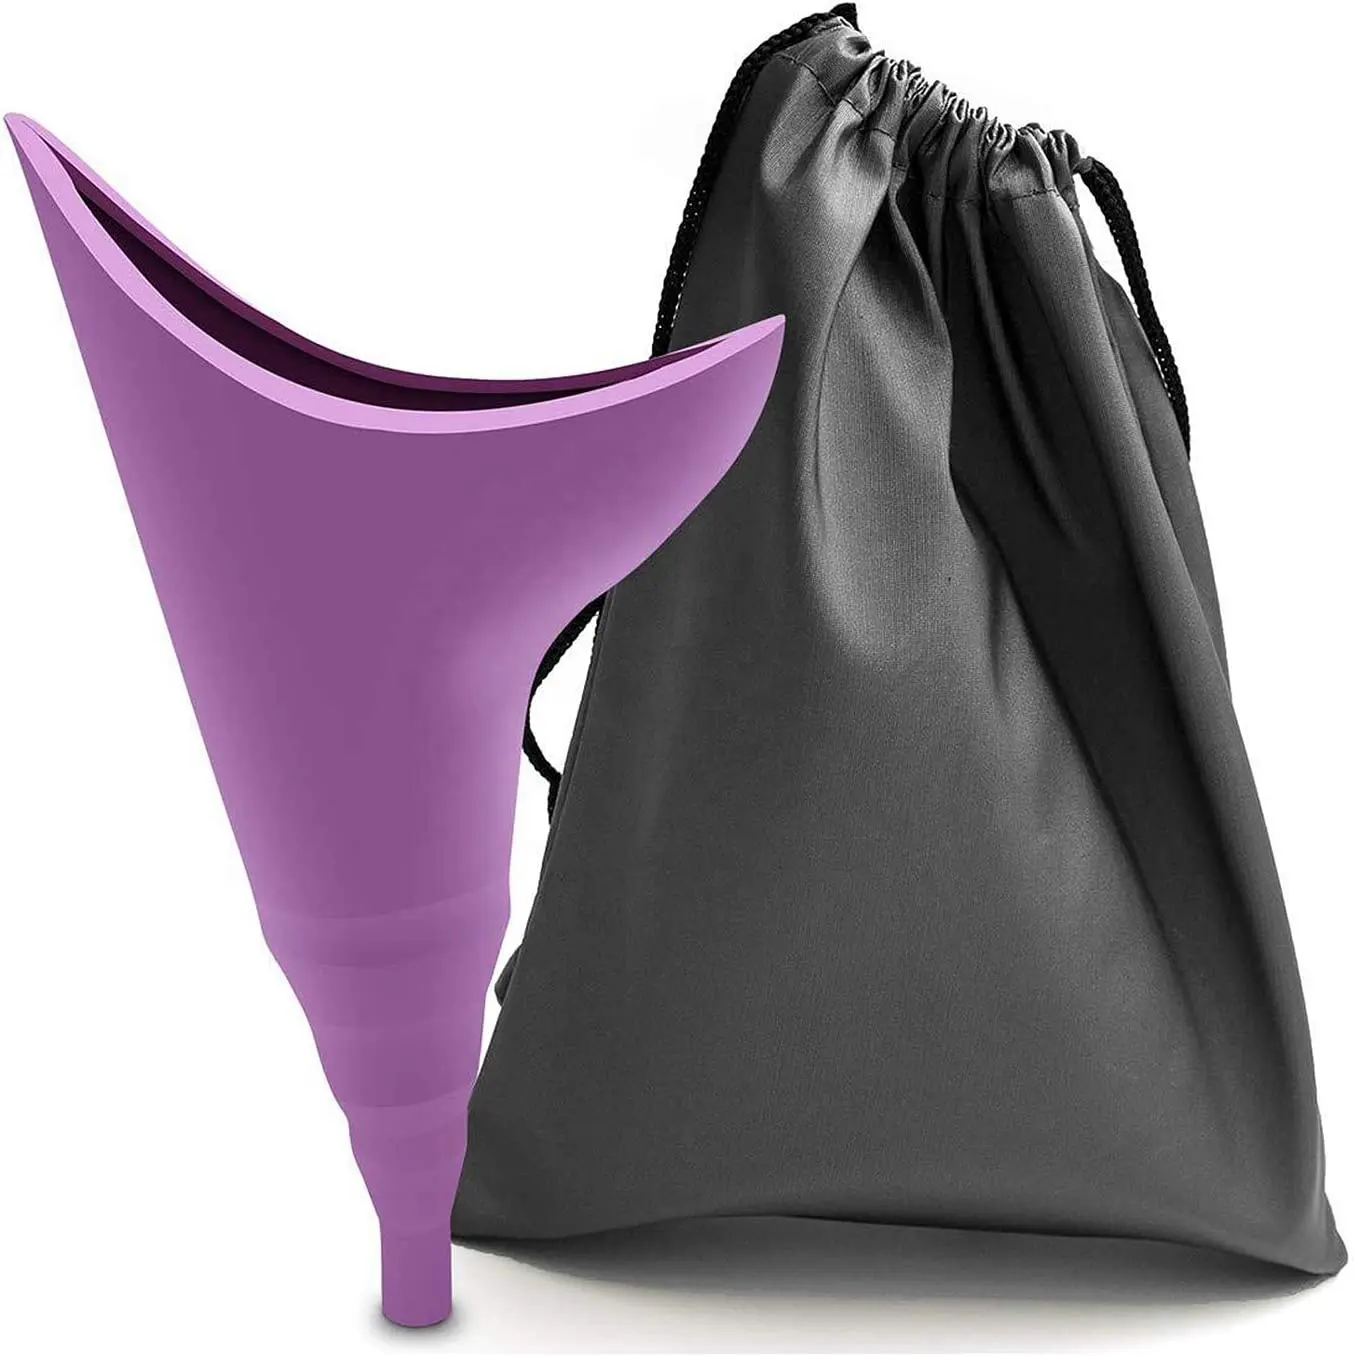 Female Urinal for Women Silicone Pee Funnel Allows Women to Pee Standing Up Reusable for car Outdoor Travel Camping without Tube